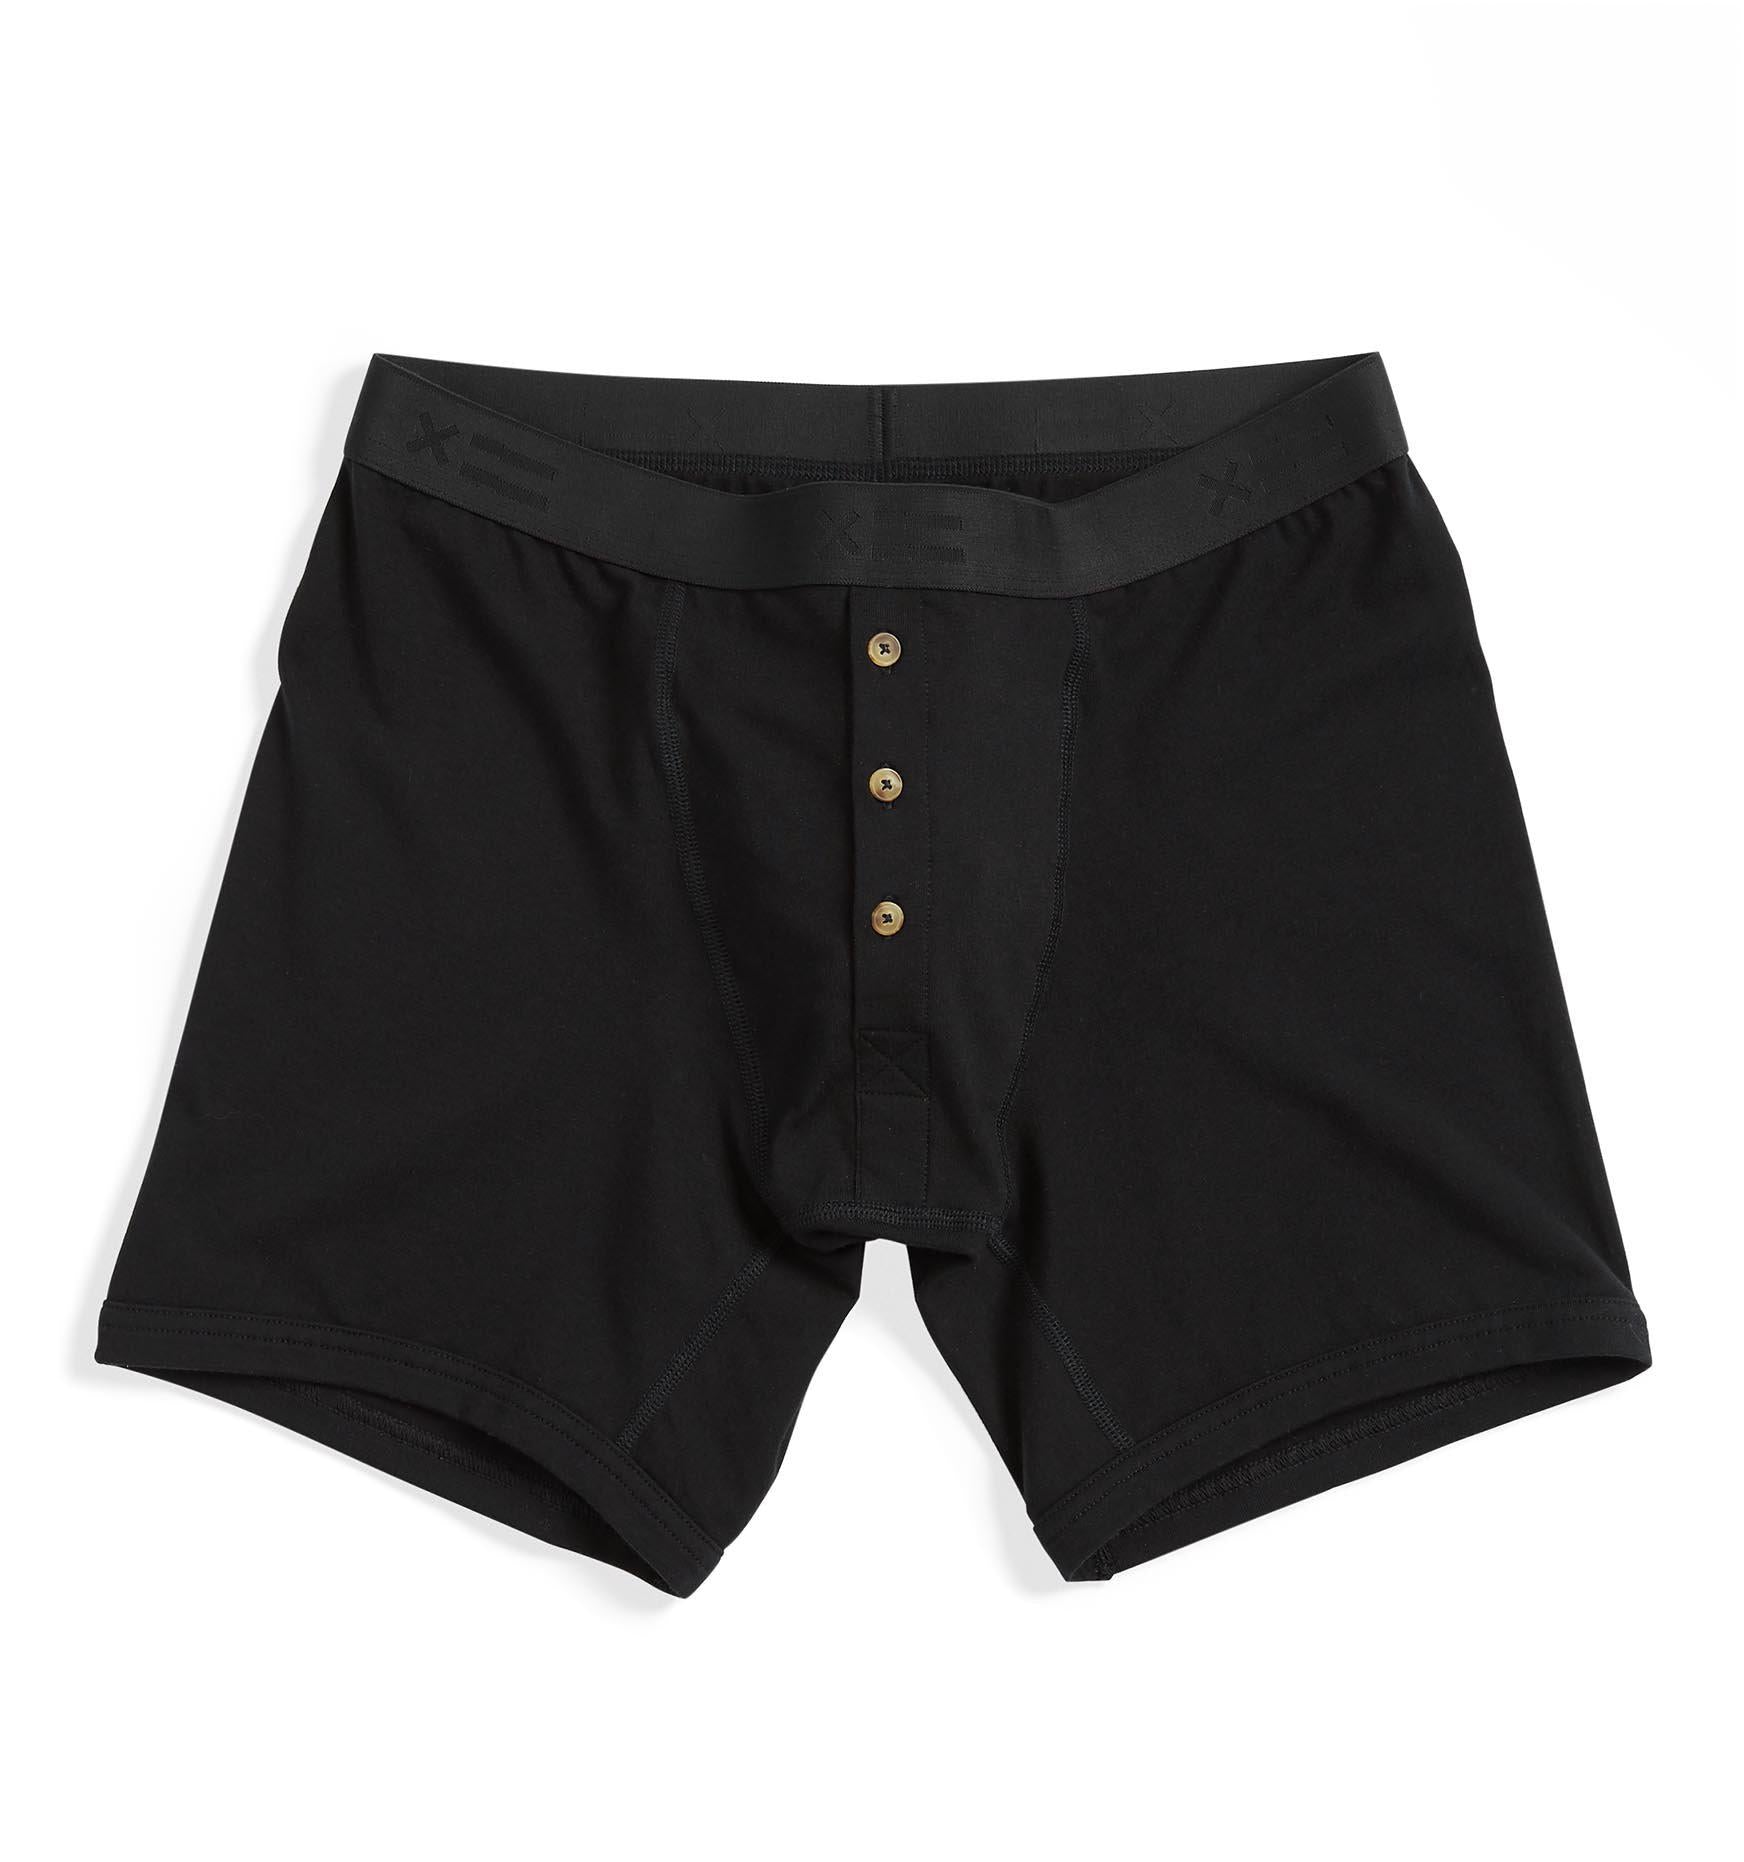 Stand to Pee Boy Shorts LC - Traveler Black – TomboyX